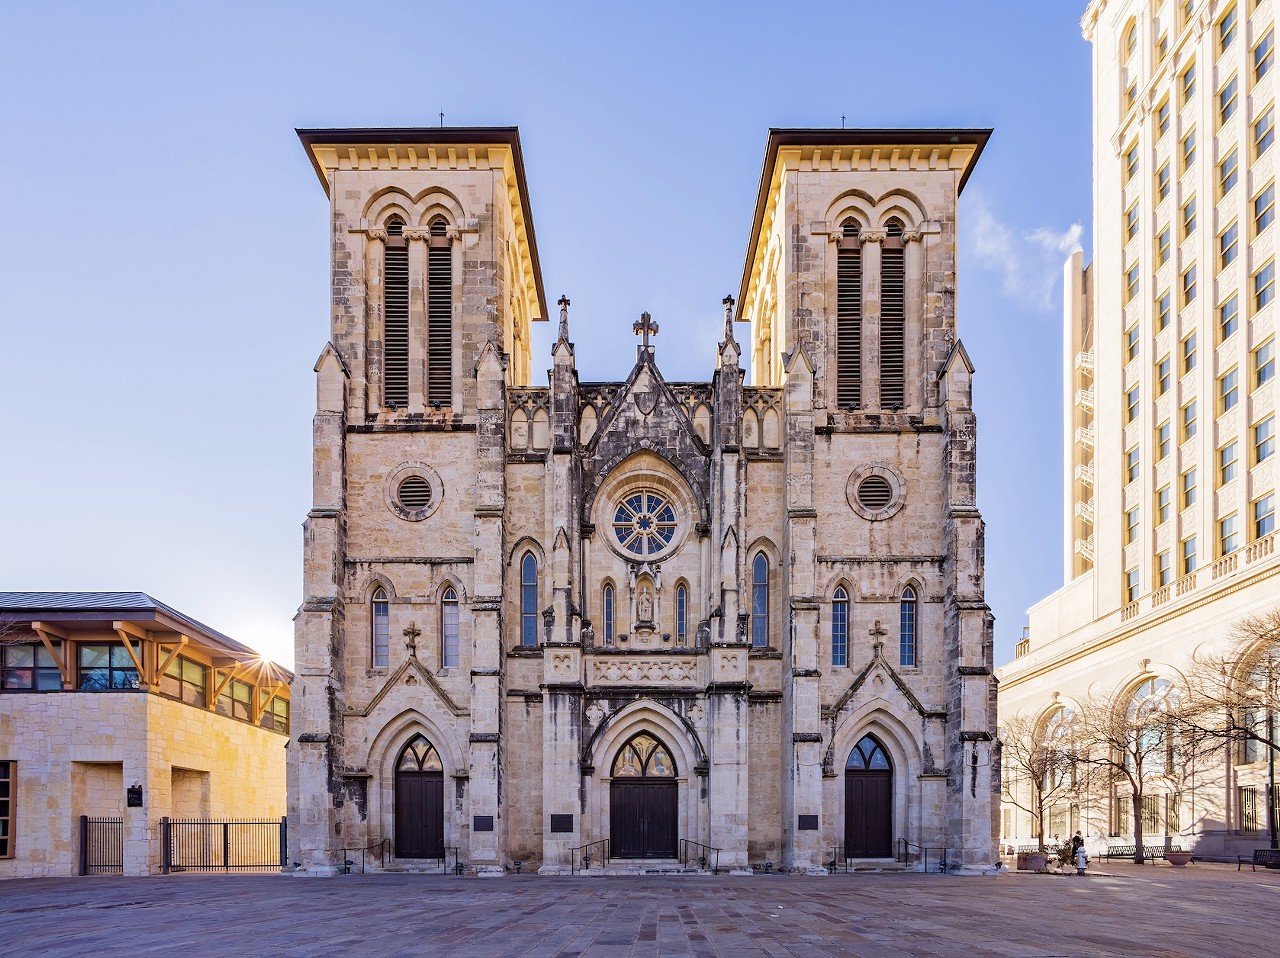 San Antonio is home to the oldest church in Texas — the San Fernando Cathedral. Facing downtown’s Main Plaza, this structure built between 1738 and 1750 was considered the city’s geographical and cultural center. In addition to being the oldest continuously functioning place of worship in San Antonio, it’s also one of the nation’s oldest cathedrals.